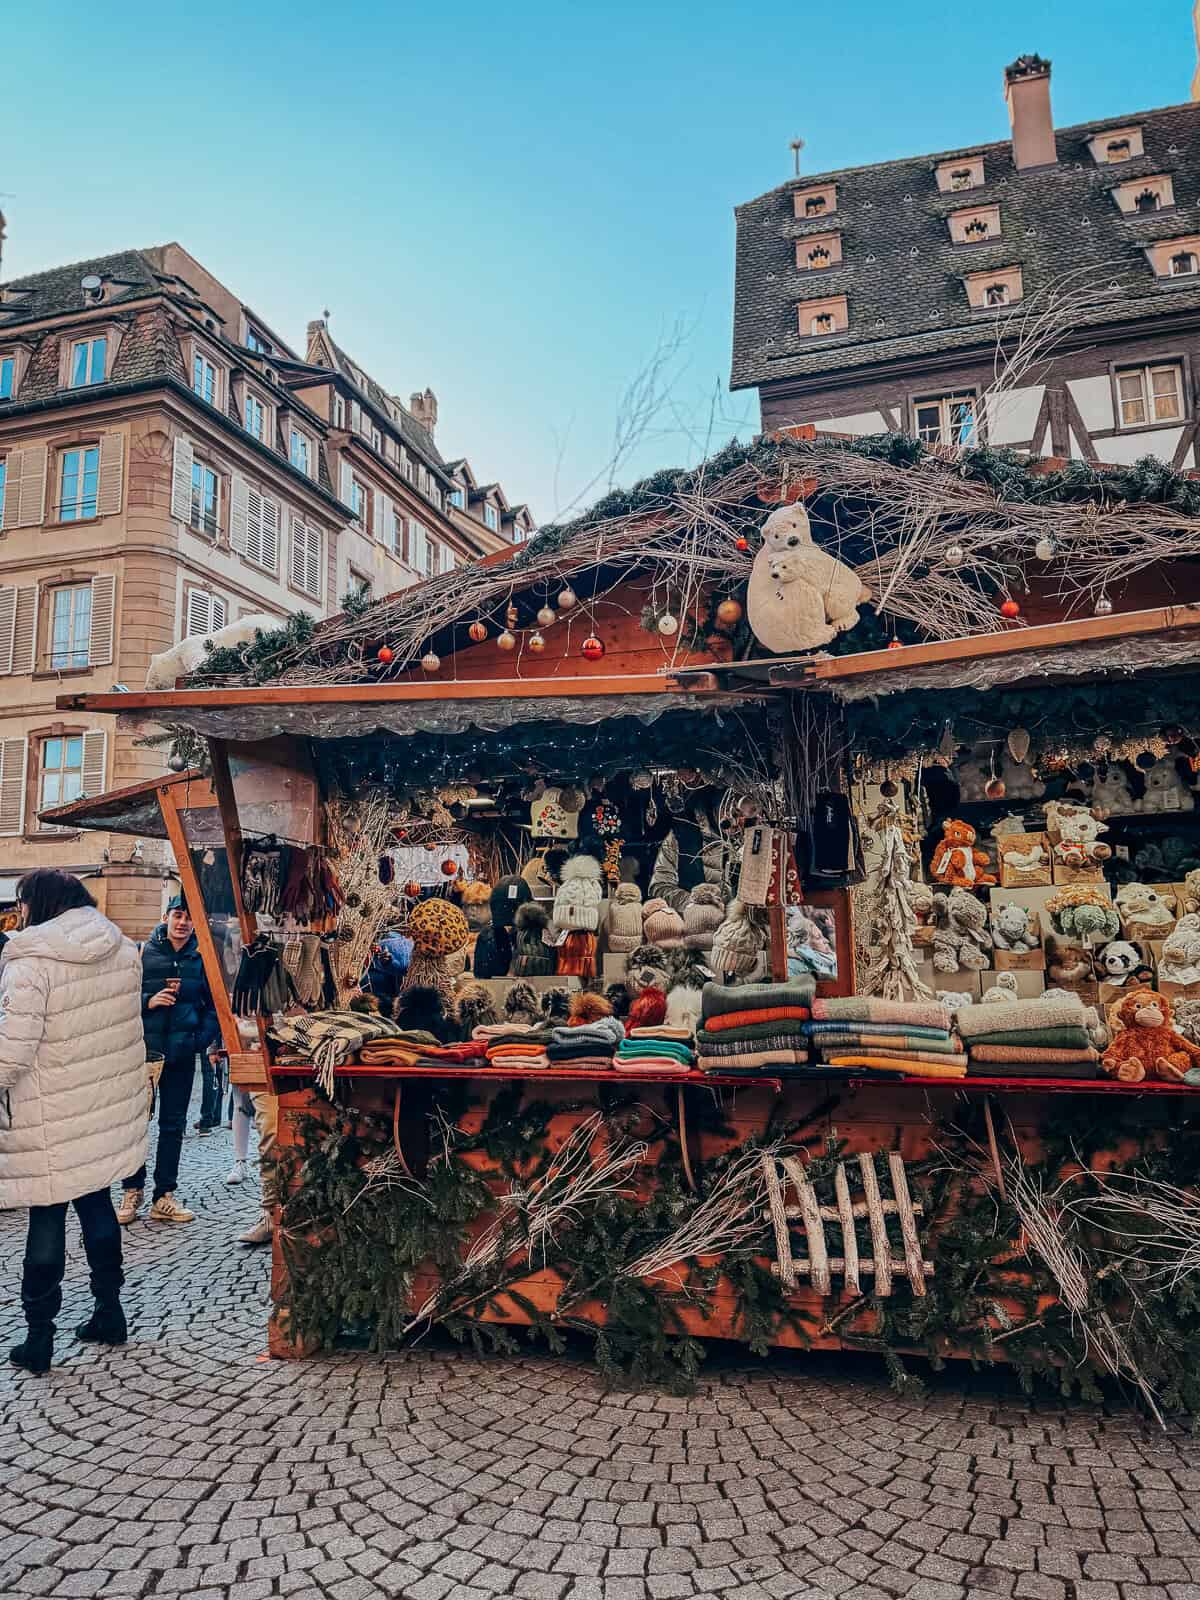 A vibrant Christmas market set in a square with the St. Thomas church in the background, featuring traditional stalls and a lively crowd.